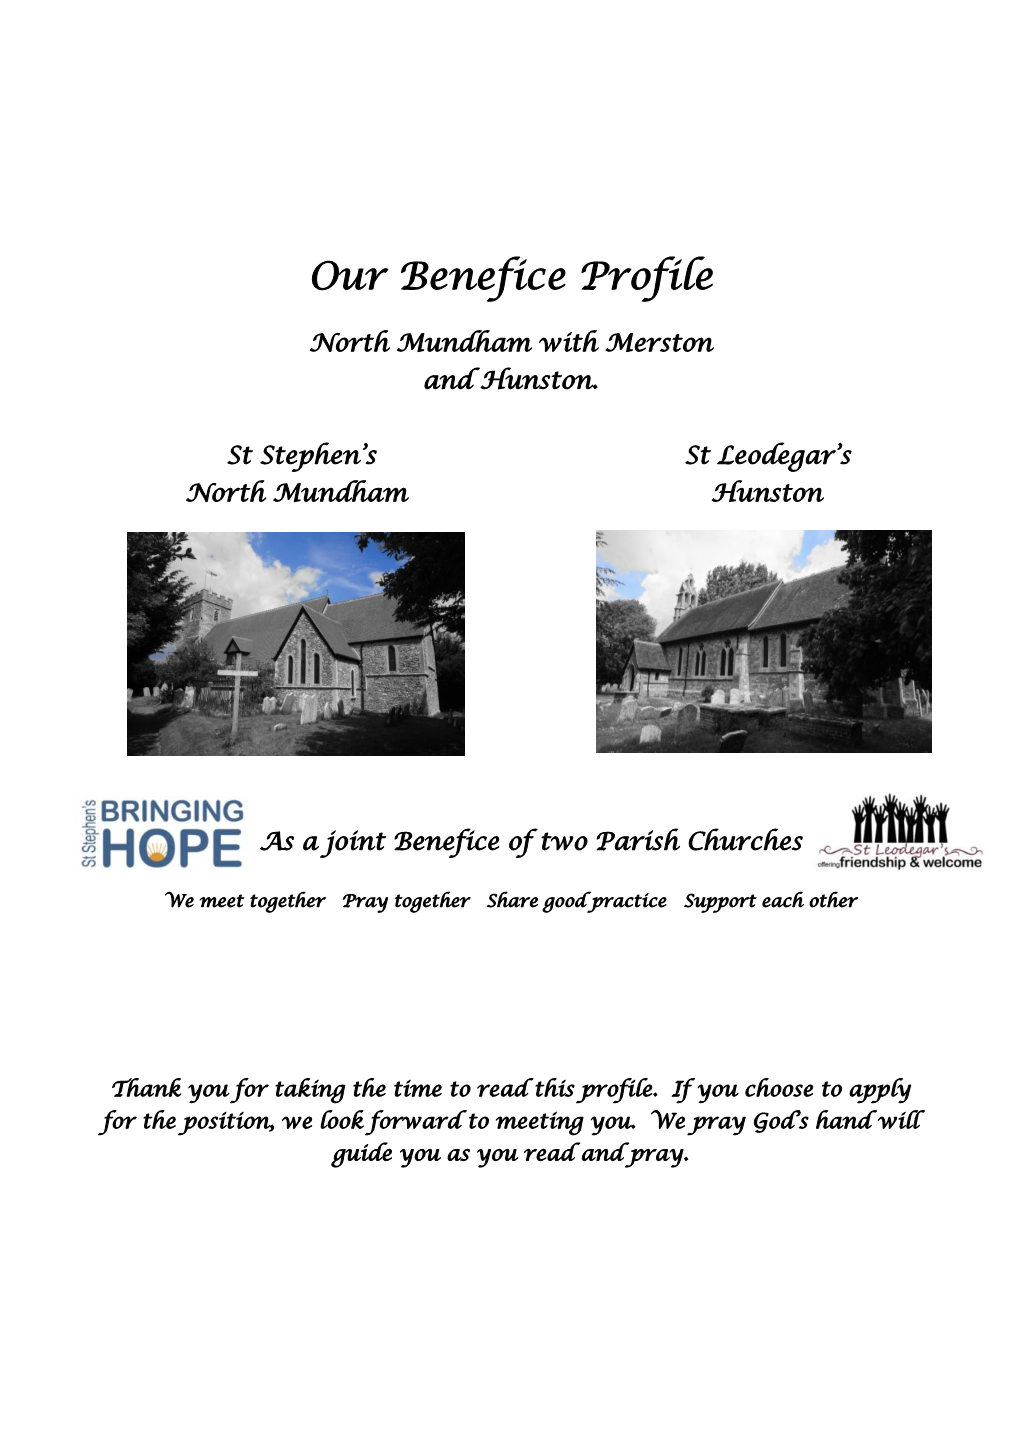 Our Benefice Profile